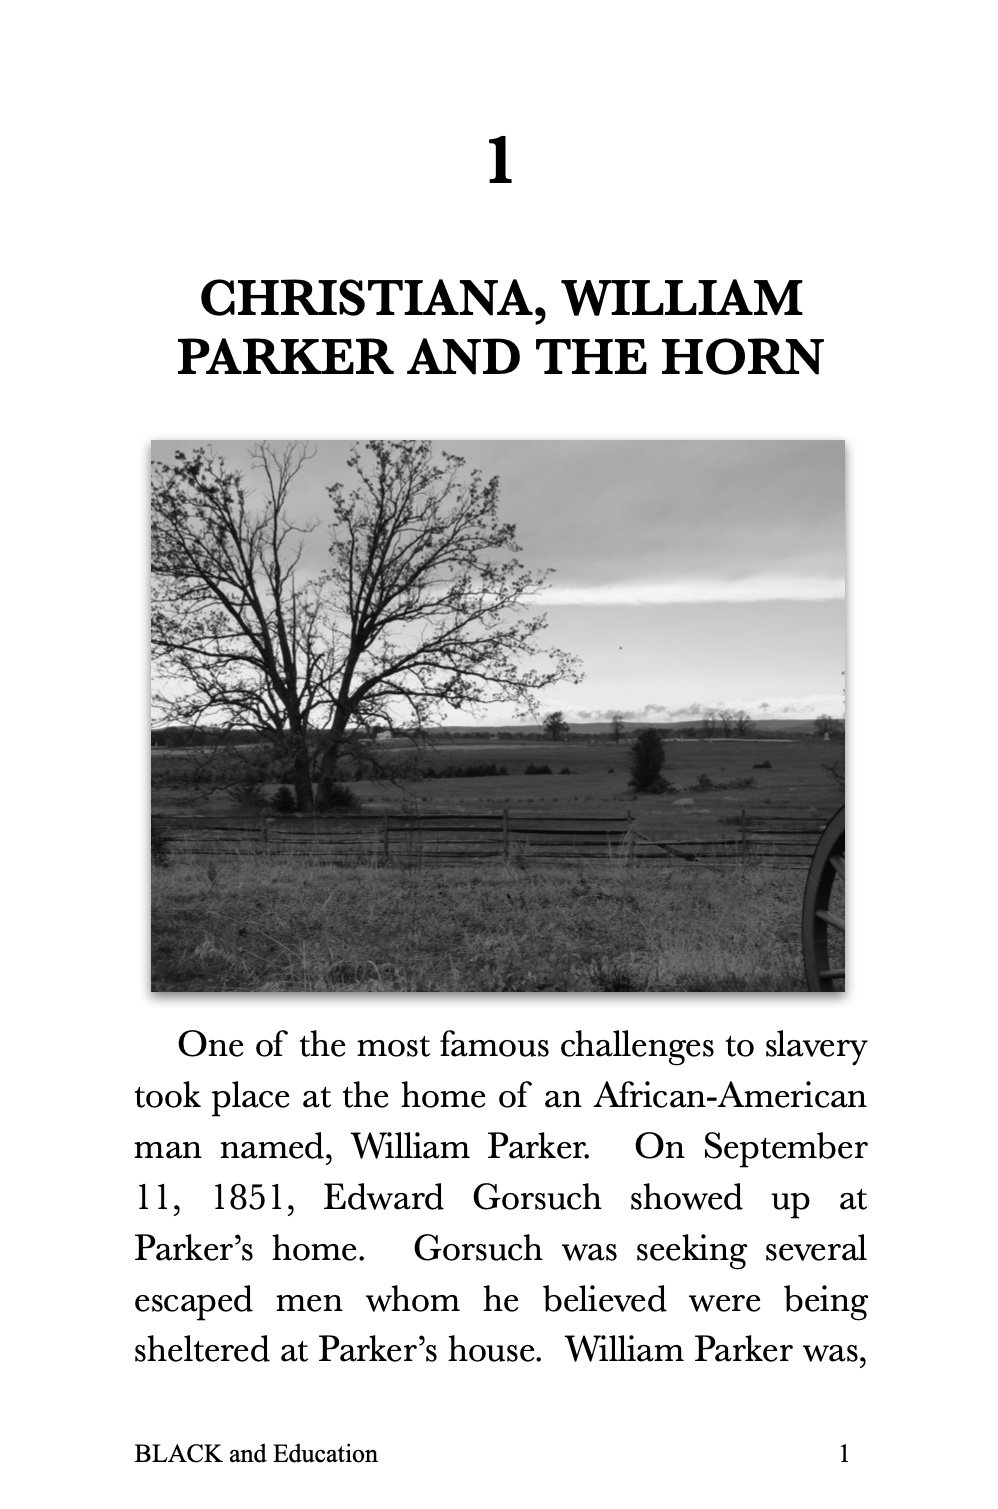 Stories about Black History Vol 3 - Christiana and William Parker.jpg